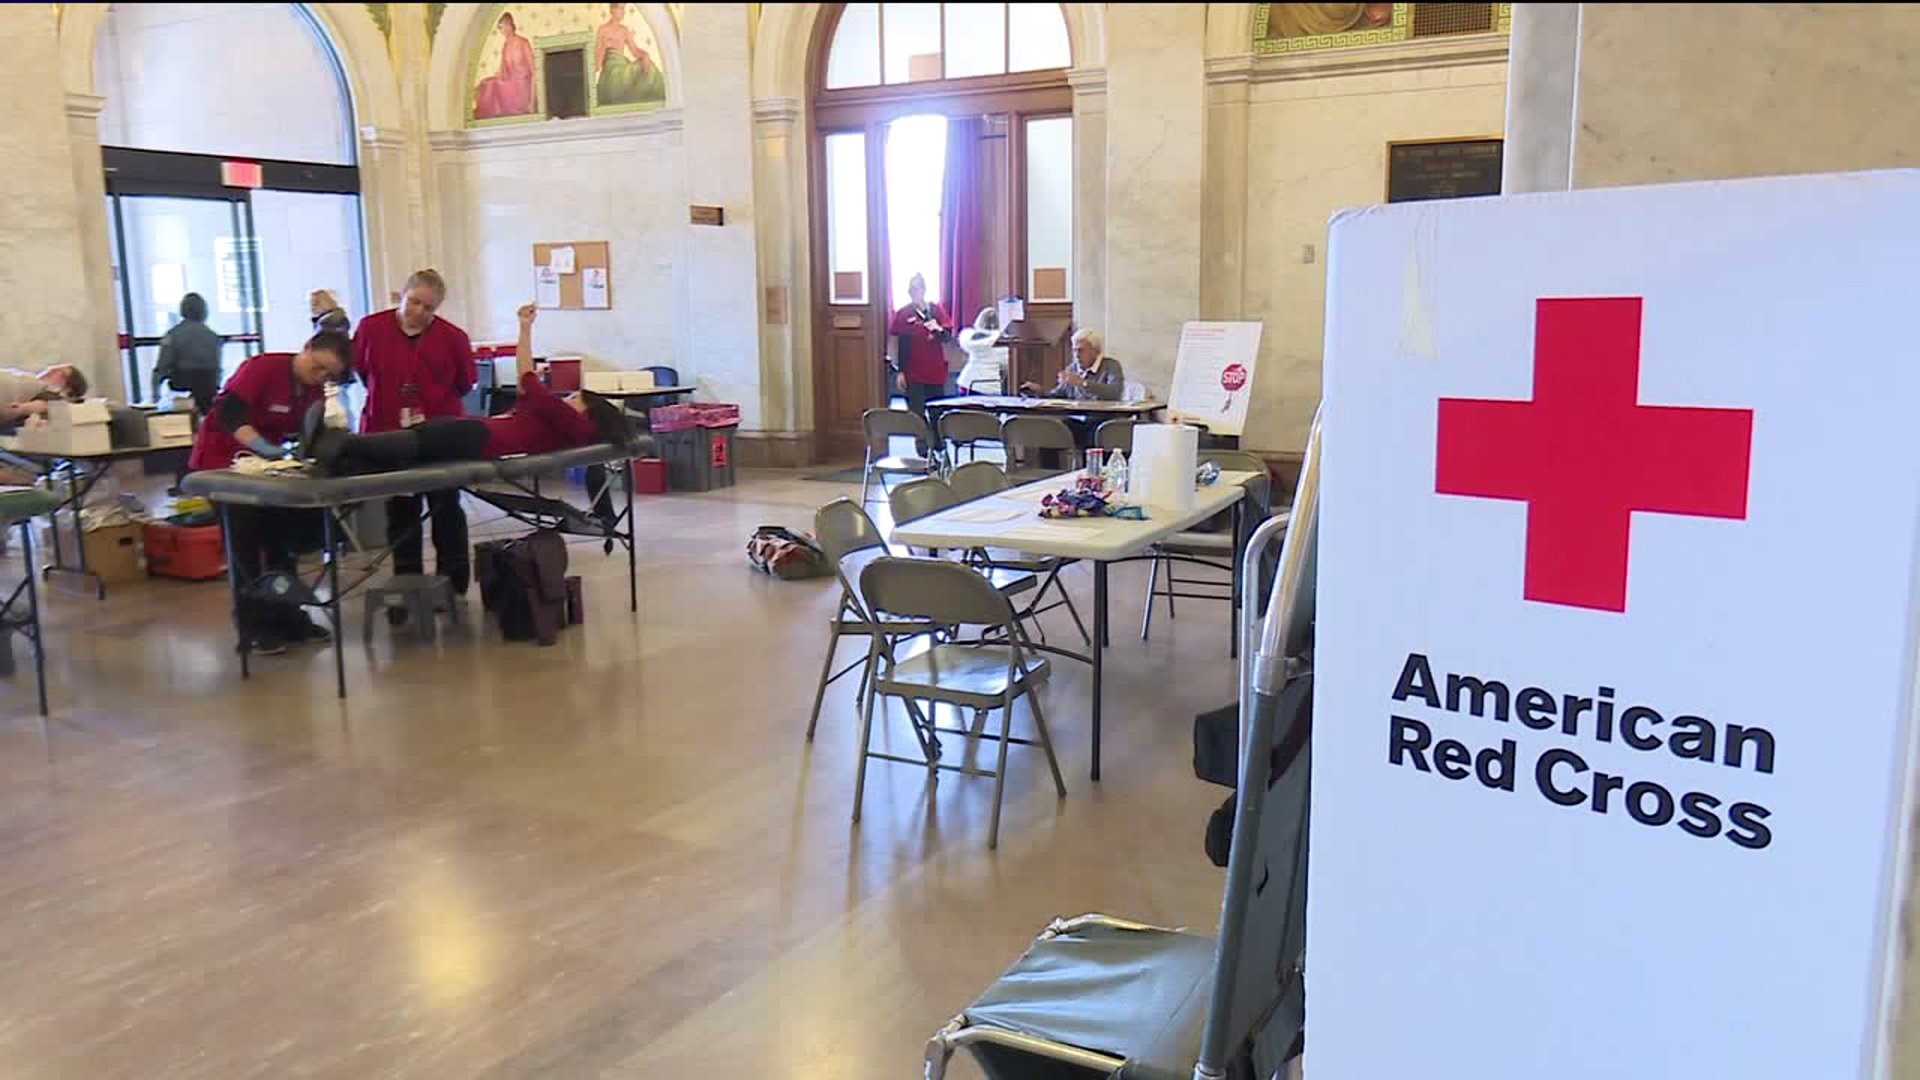 'A Positive Gift' - Red Cross Accepts Blood Donations on Valentine's Day